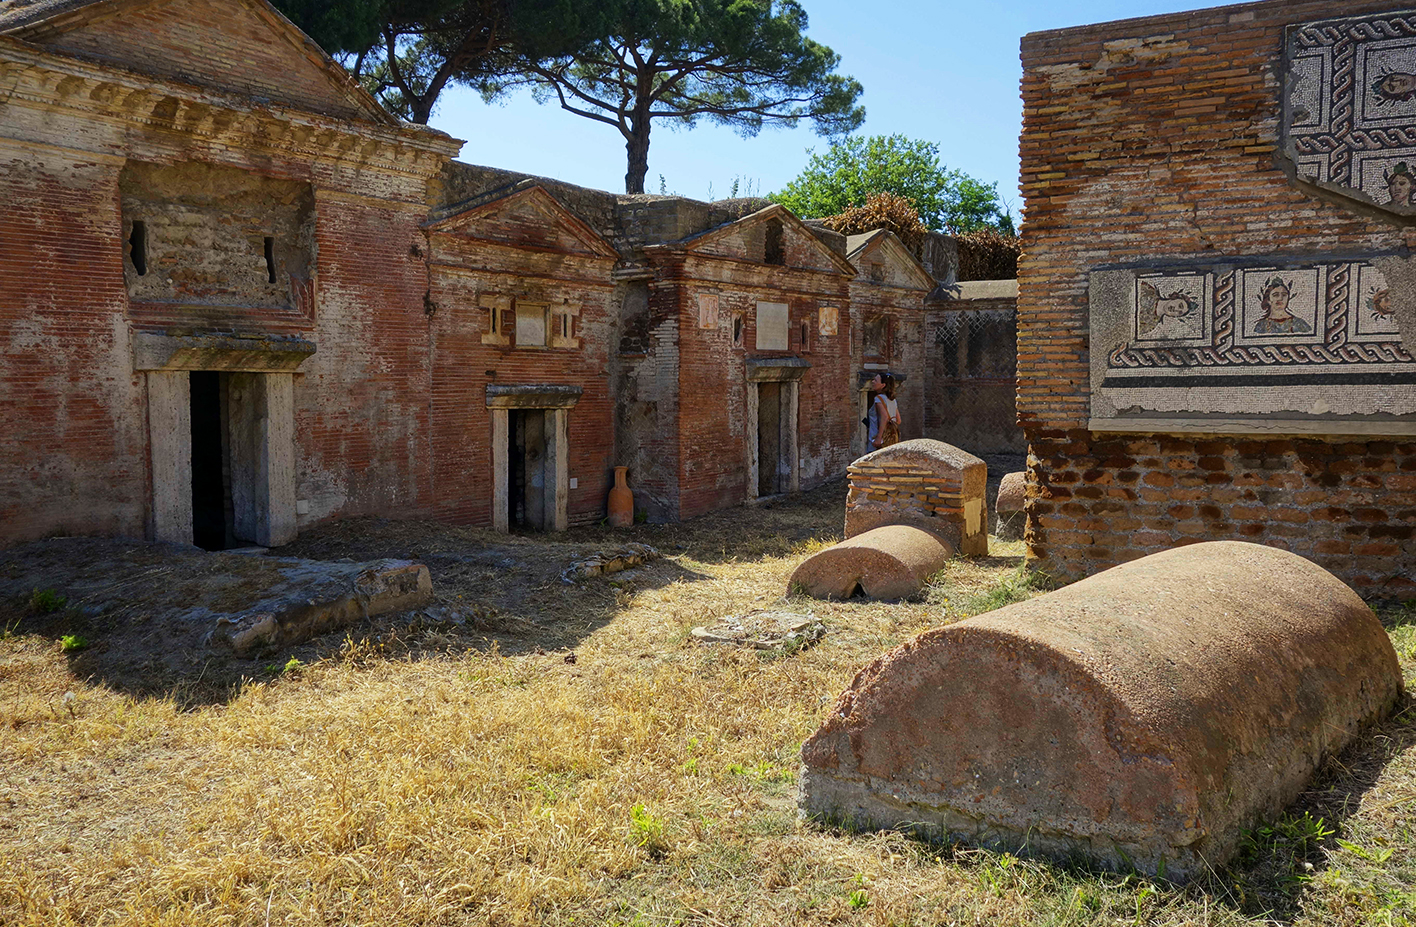 An open space among some decorated sepulchres in the Necropolis of Portus